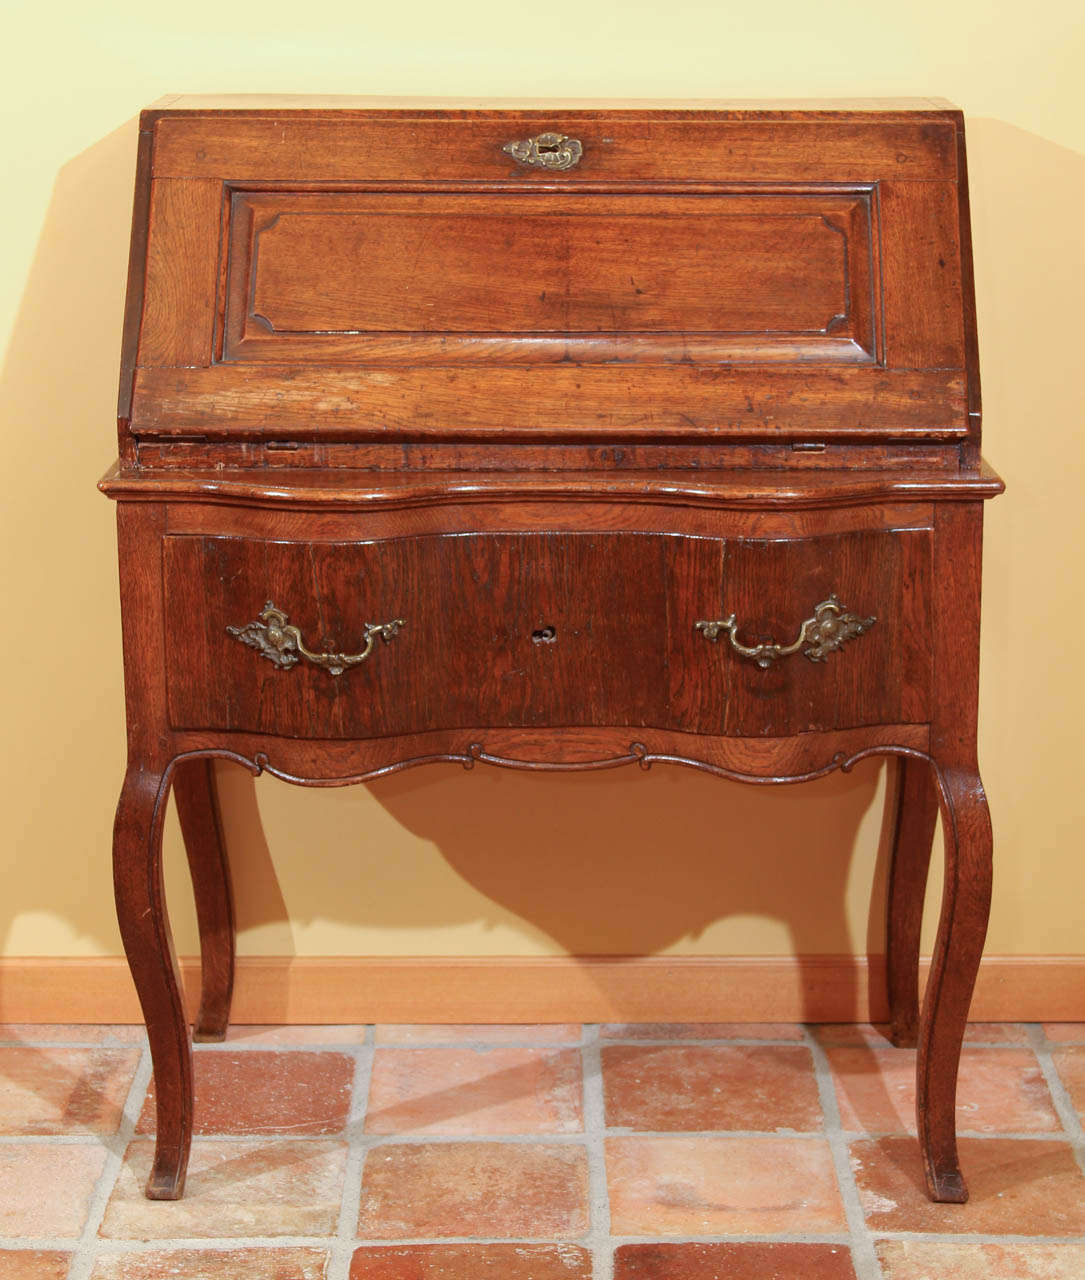 Dutch 18th Century Drop Front Desk

This is a very early, Dutch oak desk with a drop down front. The front slat lid has raised panel work and a beautiful old Louis XV escutcheon. Behind the escutcheon is the old lock (no key).

The interior